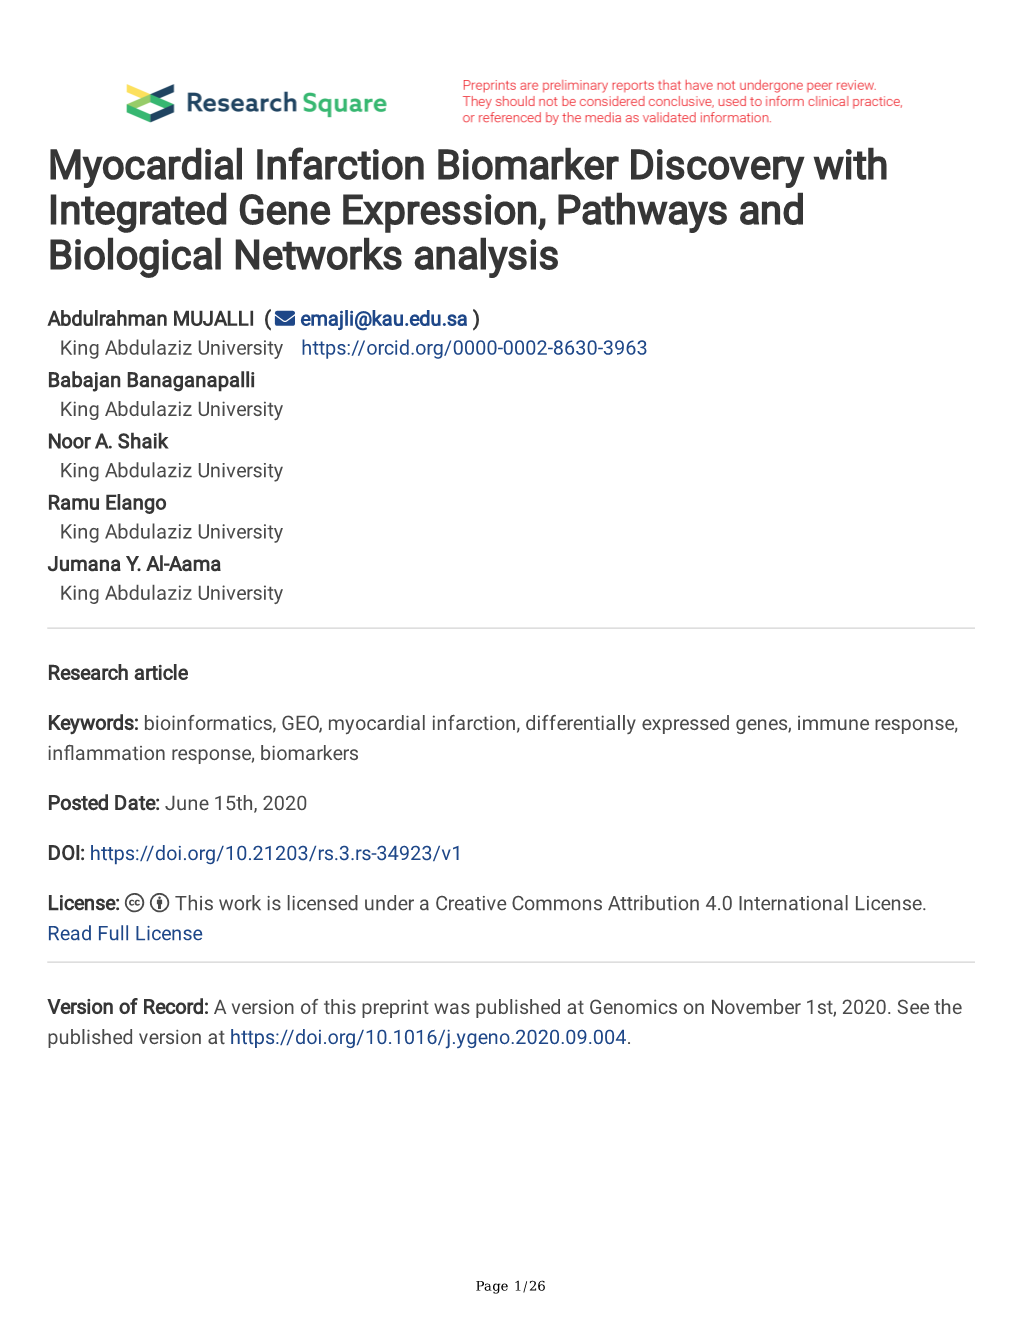 Myocardial Infarction Biomarker Discovery with Integrated Gene Expression, Pathways and Biological Networks Analysis